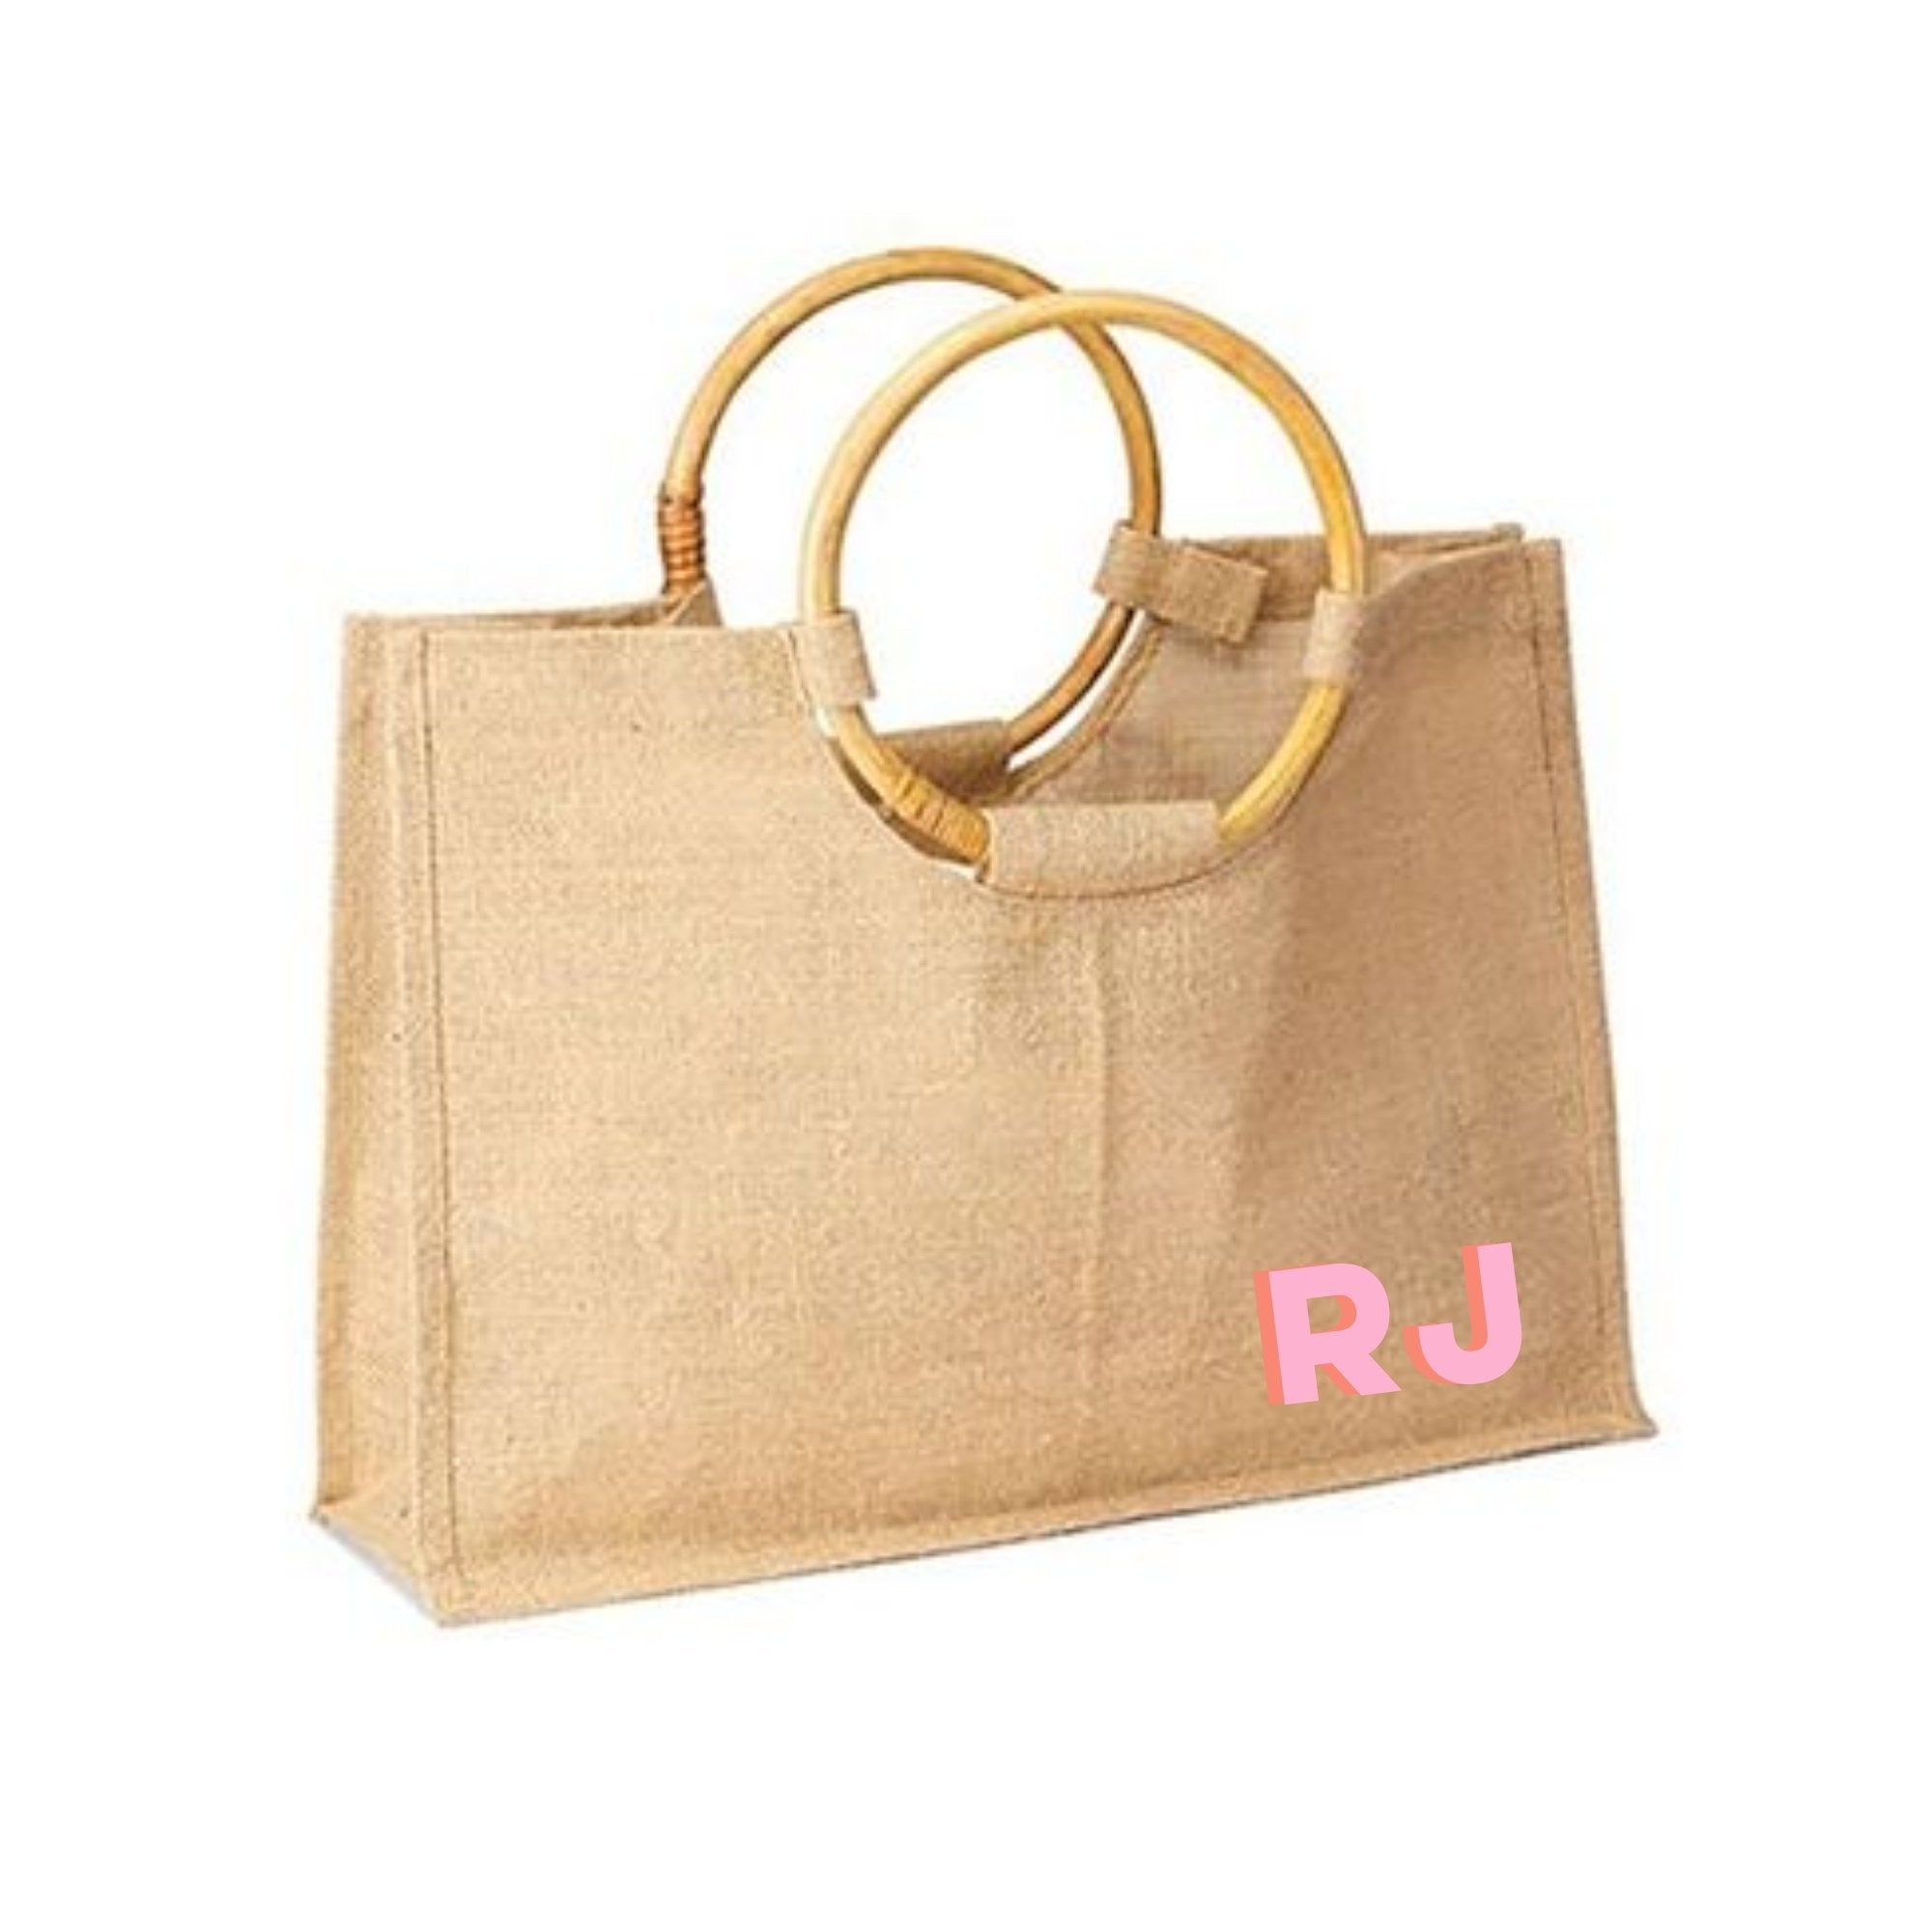 A bamboo jute is customized with a pink monogram on the bottom corner